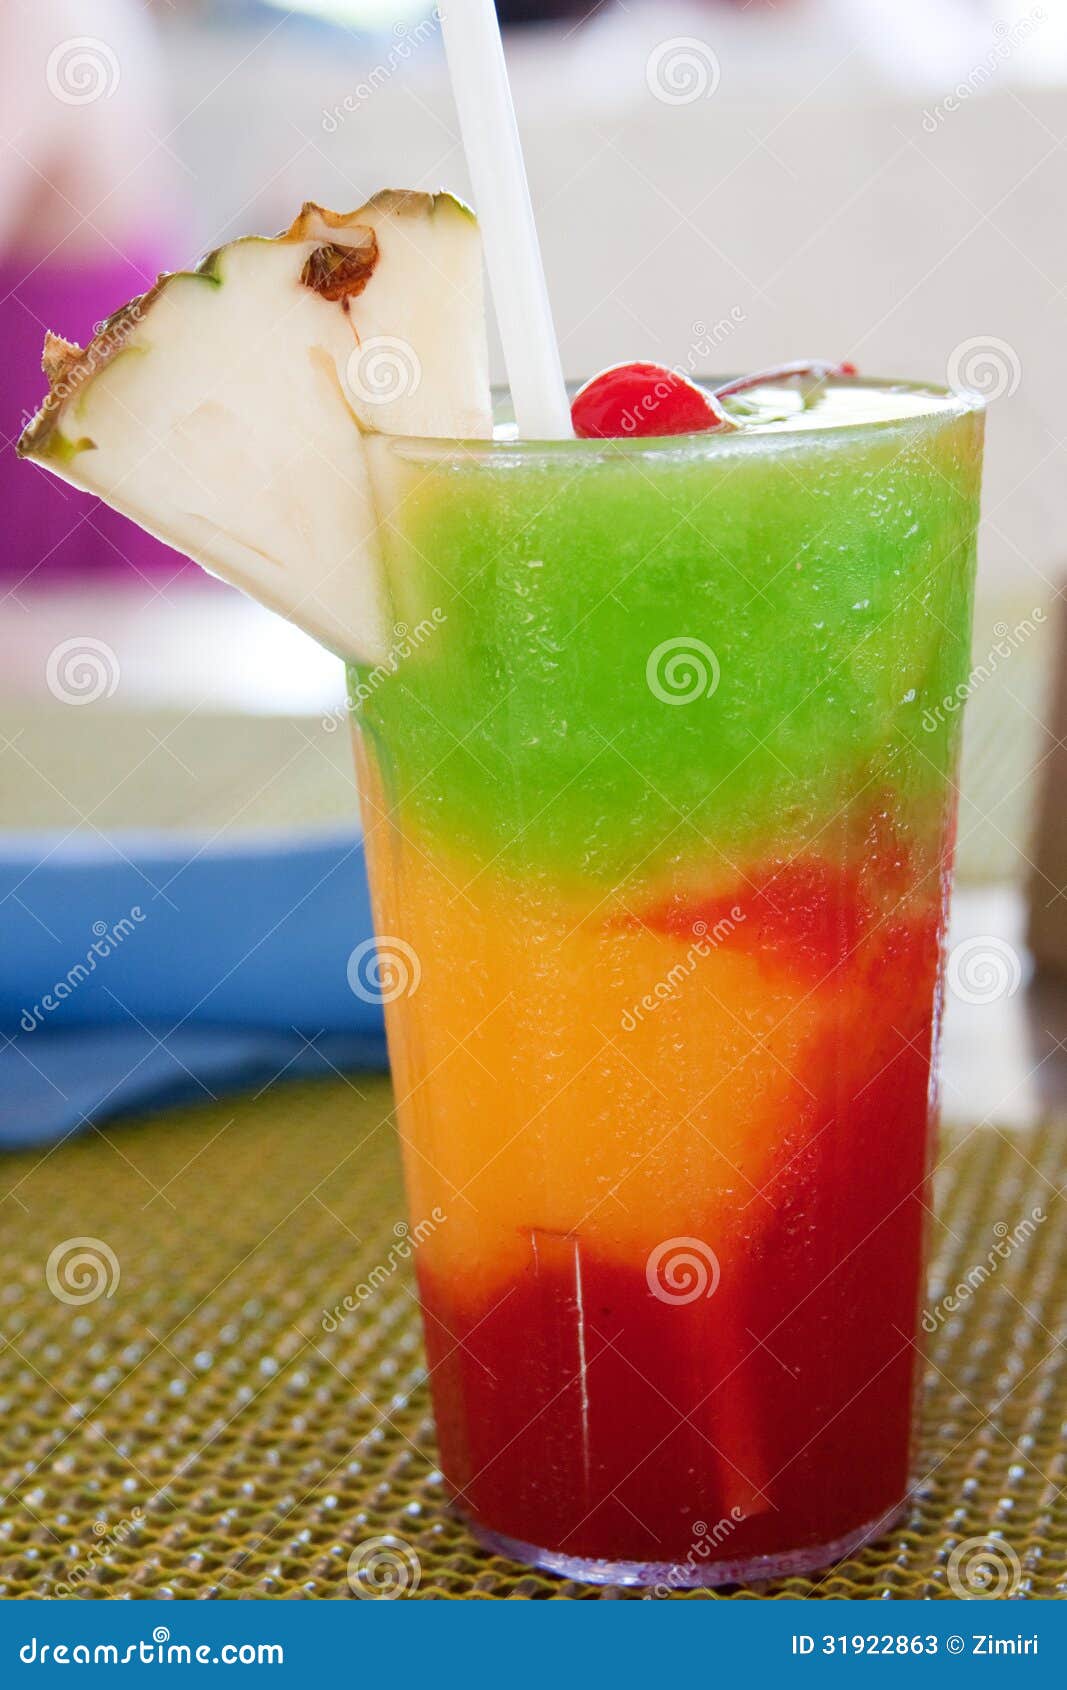 Bob Marley Drink in Jamaica Stock Image pic